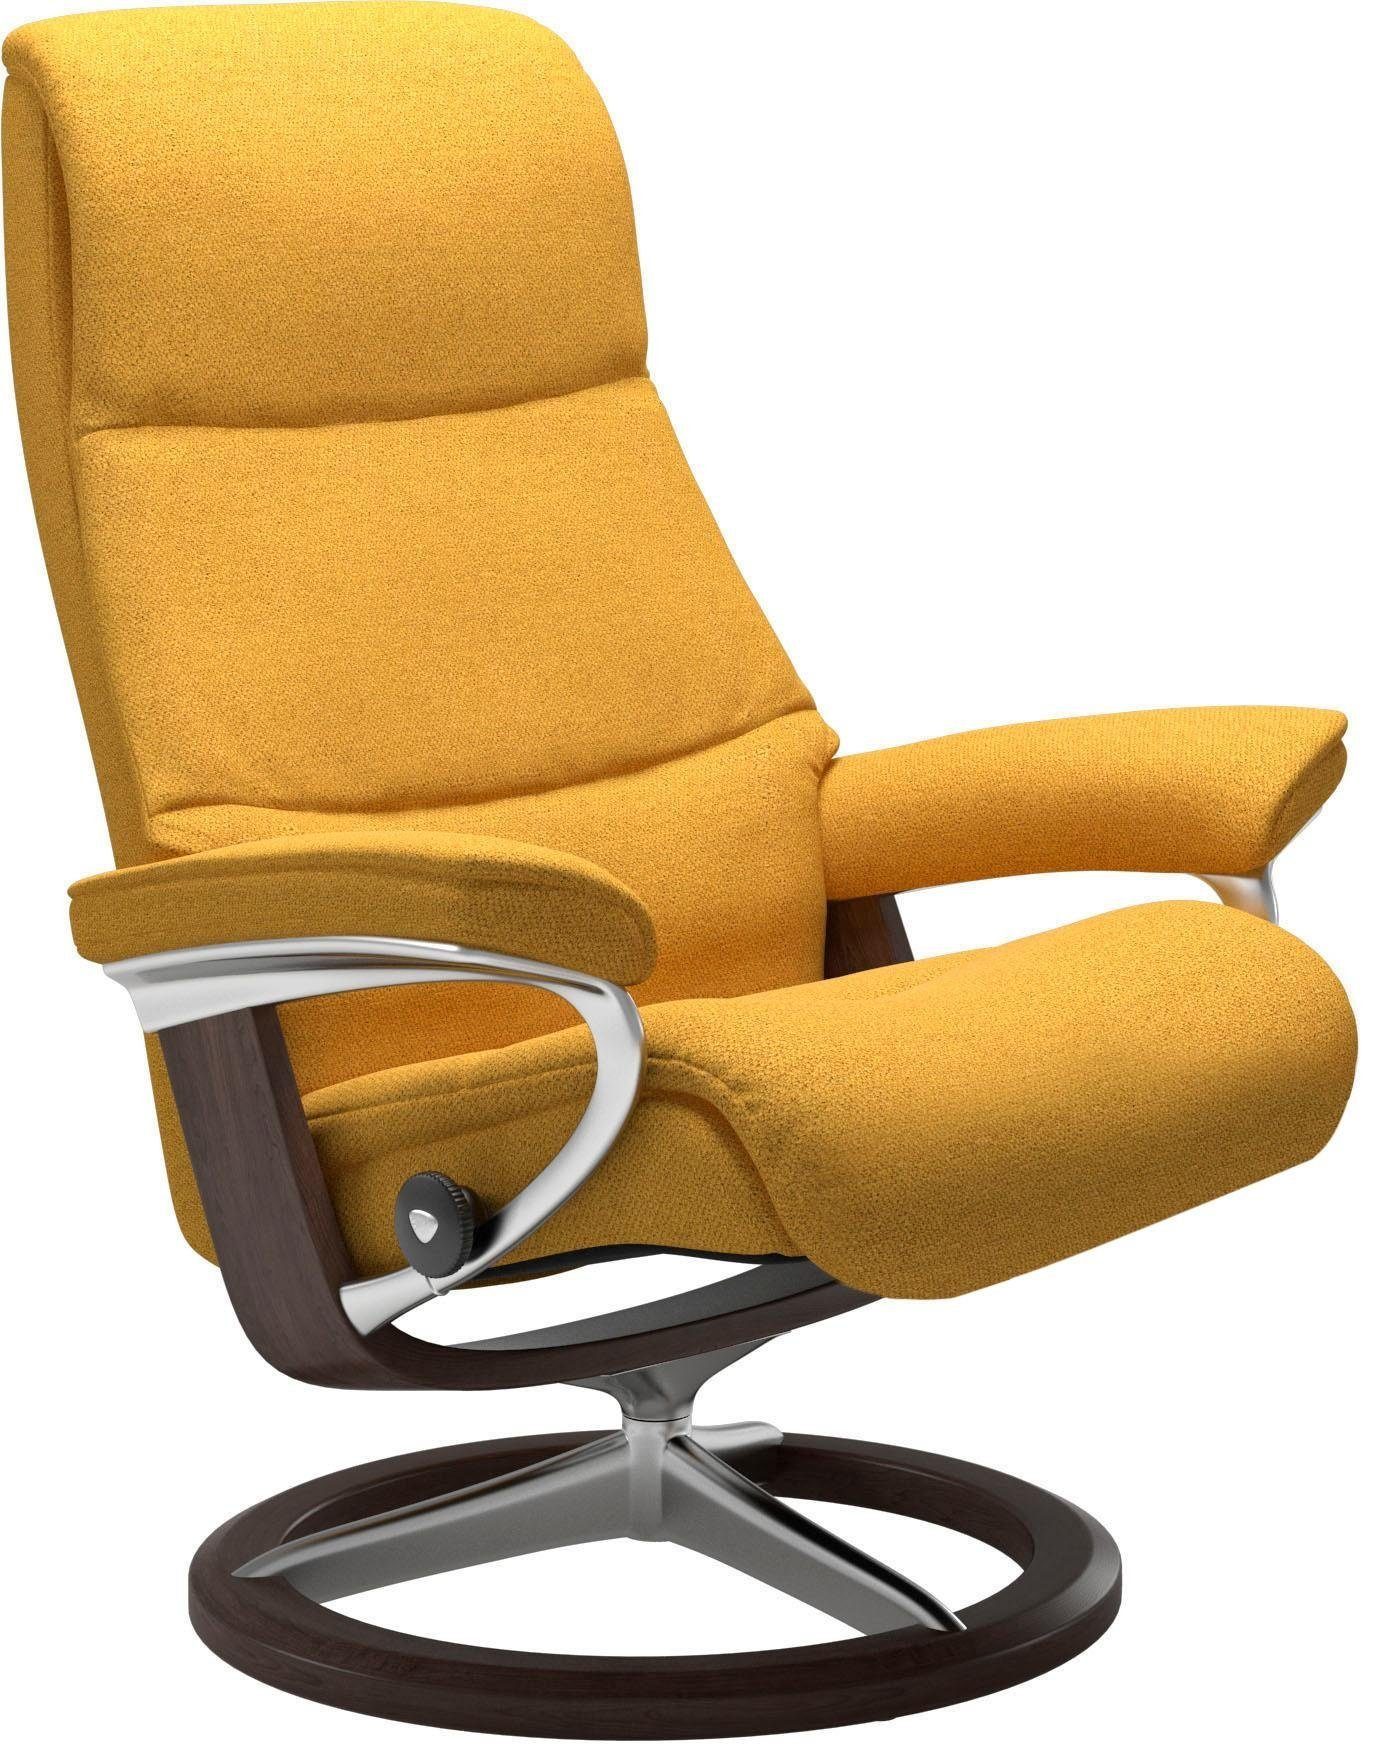 Stressless® Relaxsessel Größe Base, View, S,Gestell mit Signature Wenge